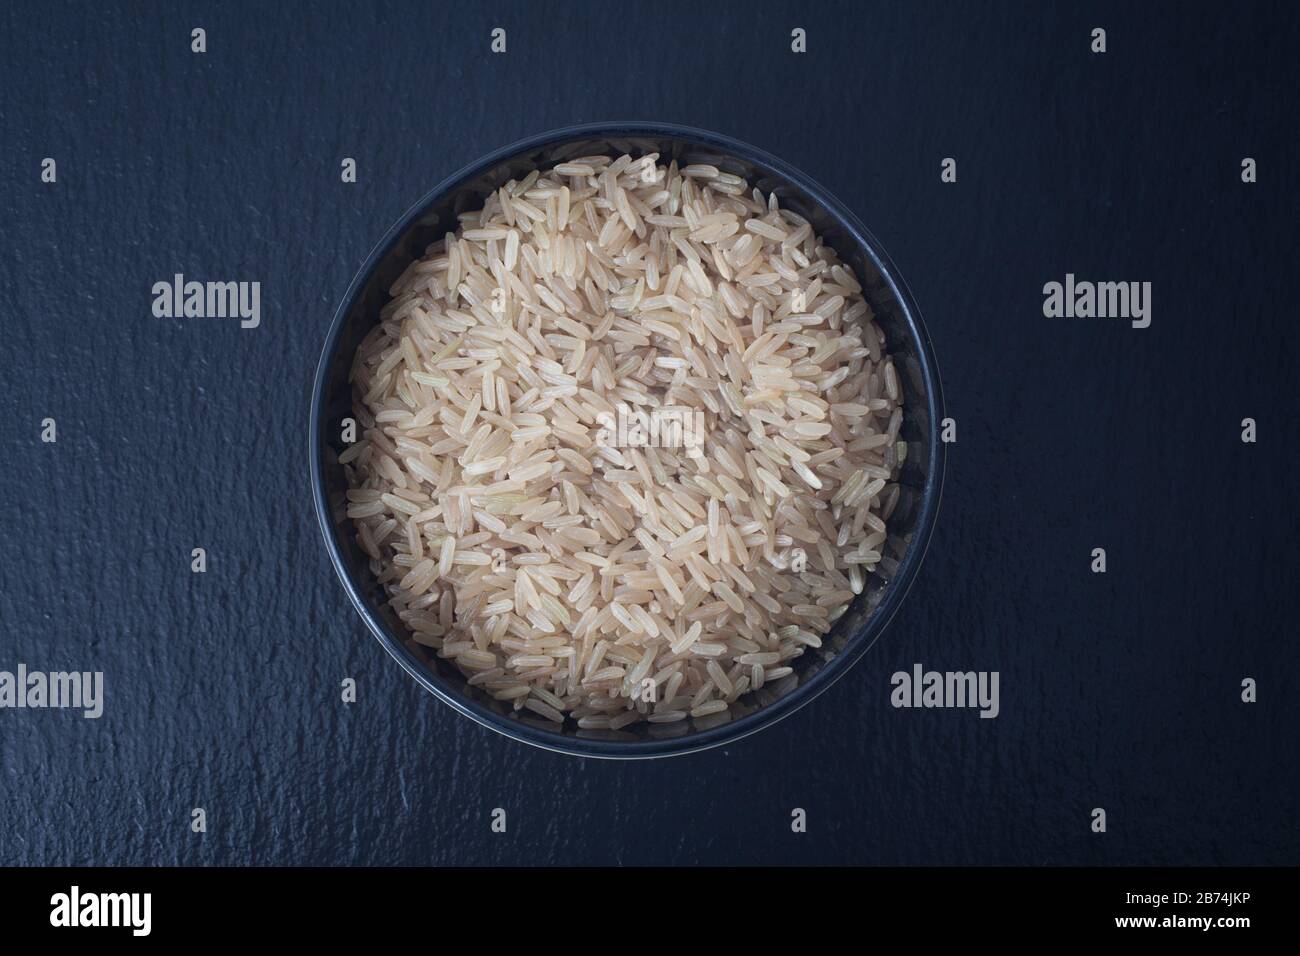 A bowl of uncooked brown rice Stock Photo